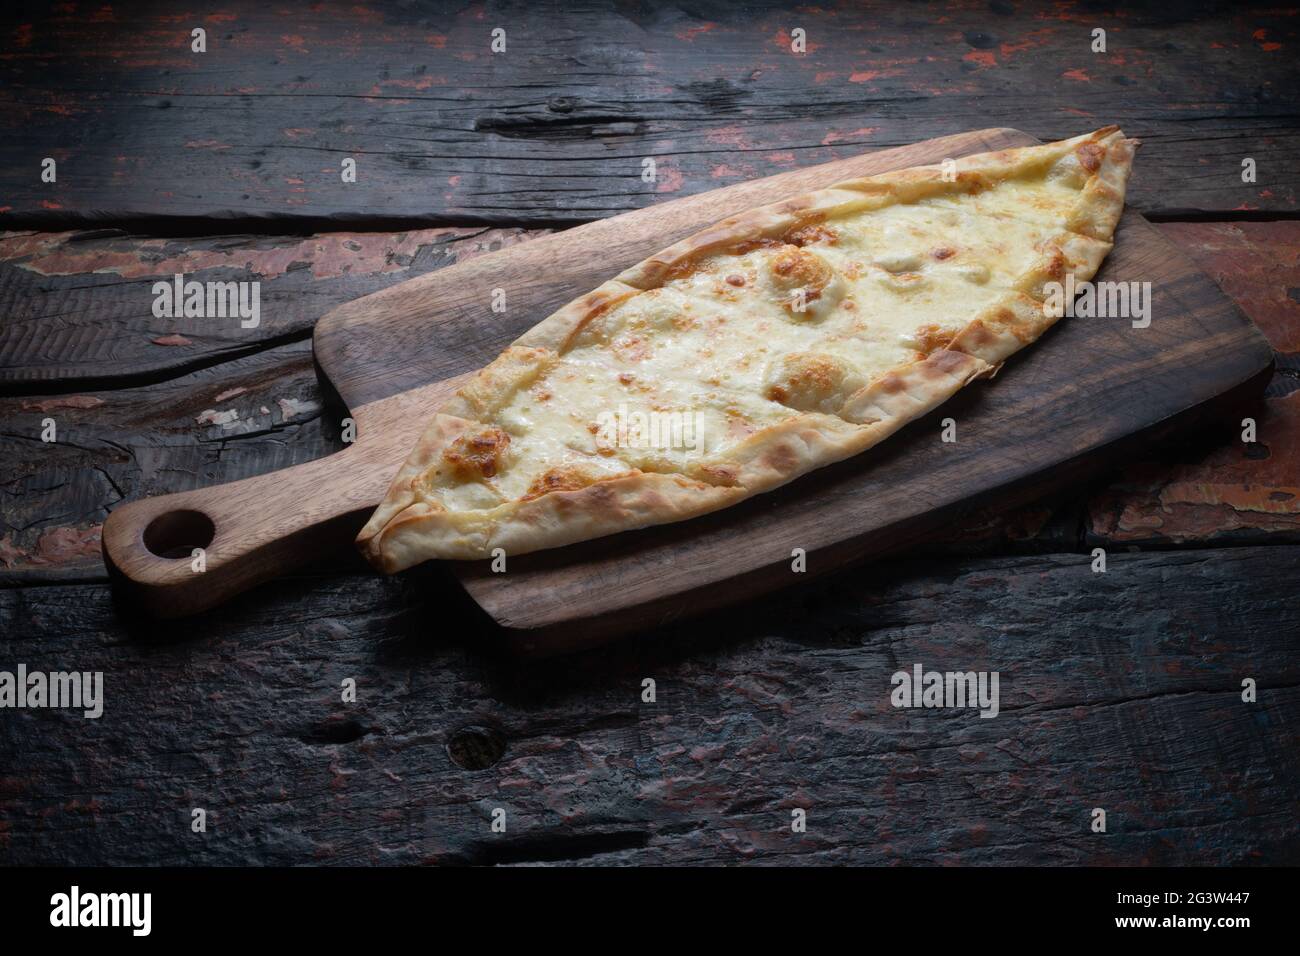 Turkish pide with cheese on rustic wooden table Stock Photo